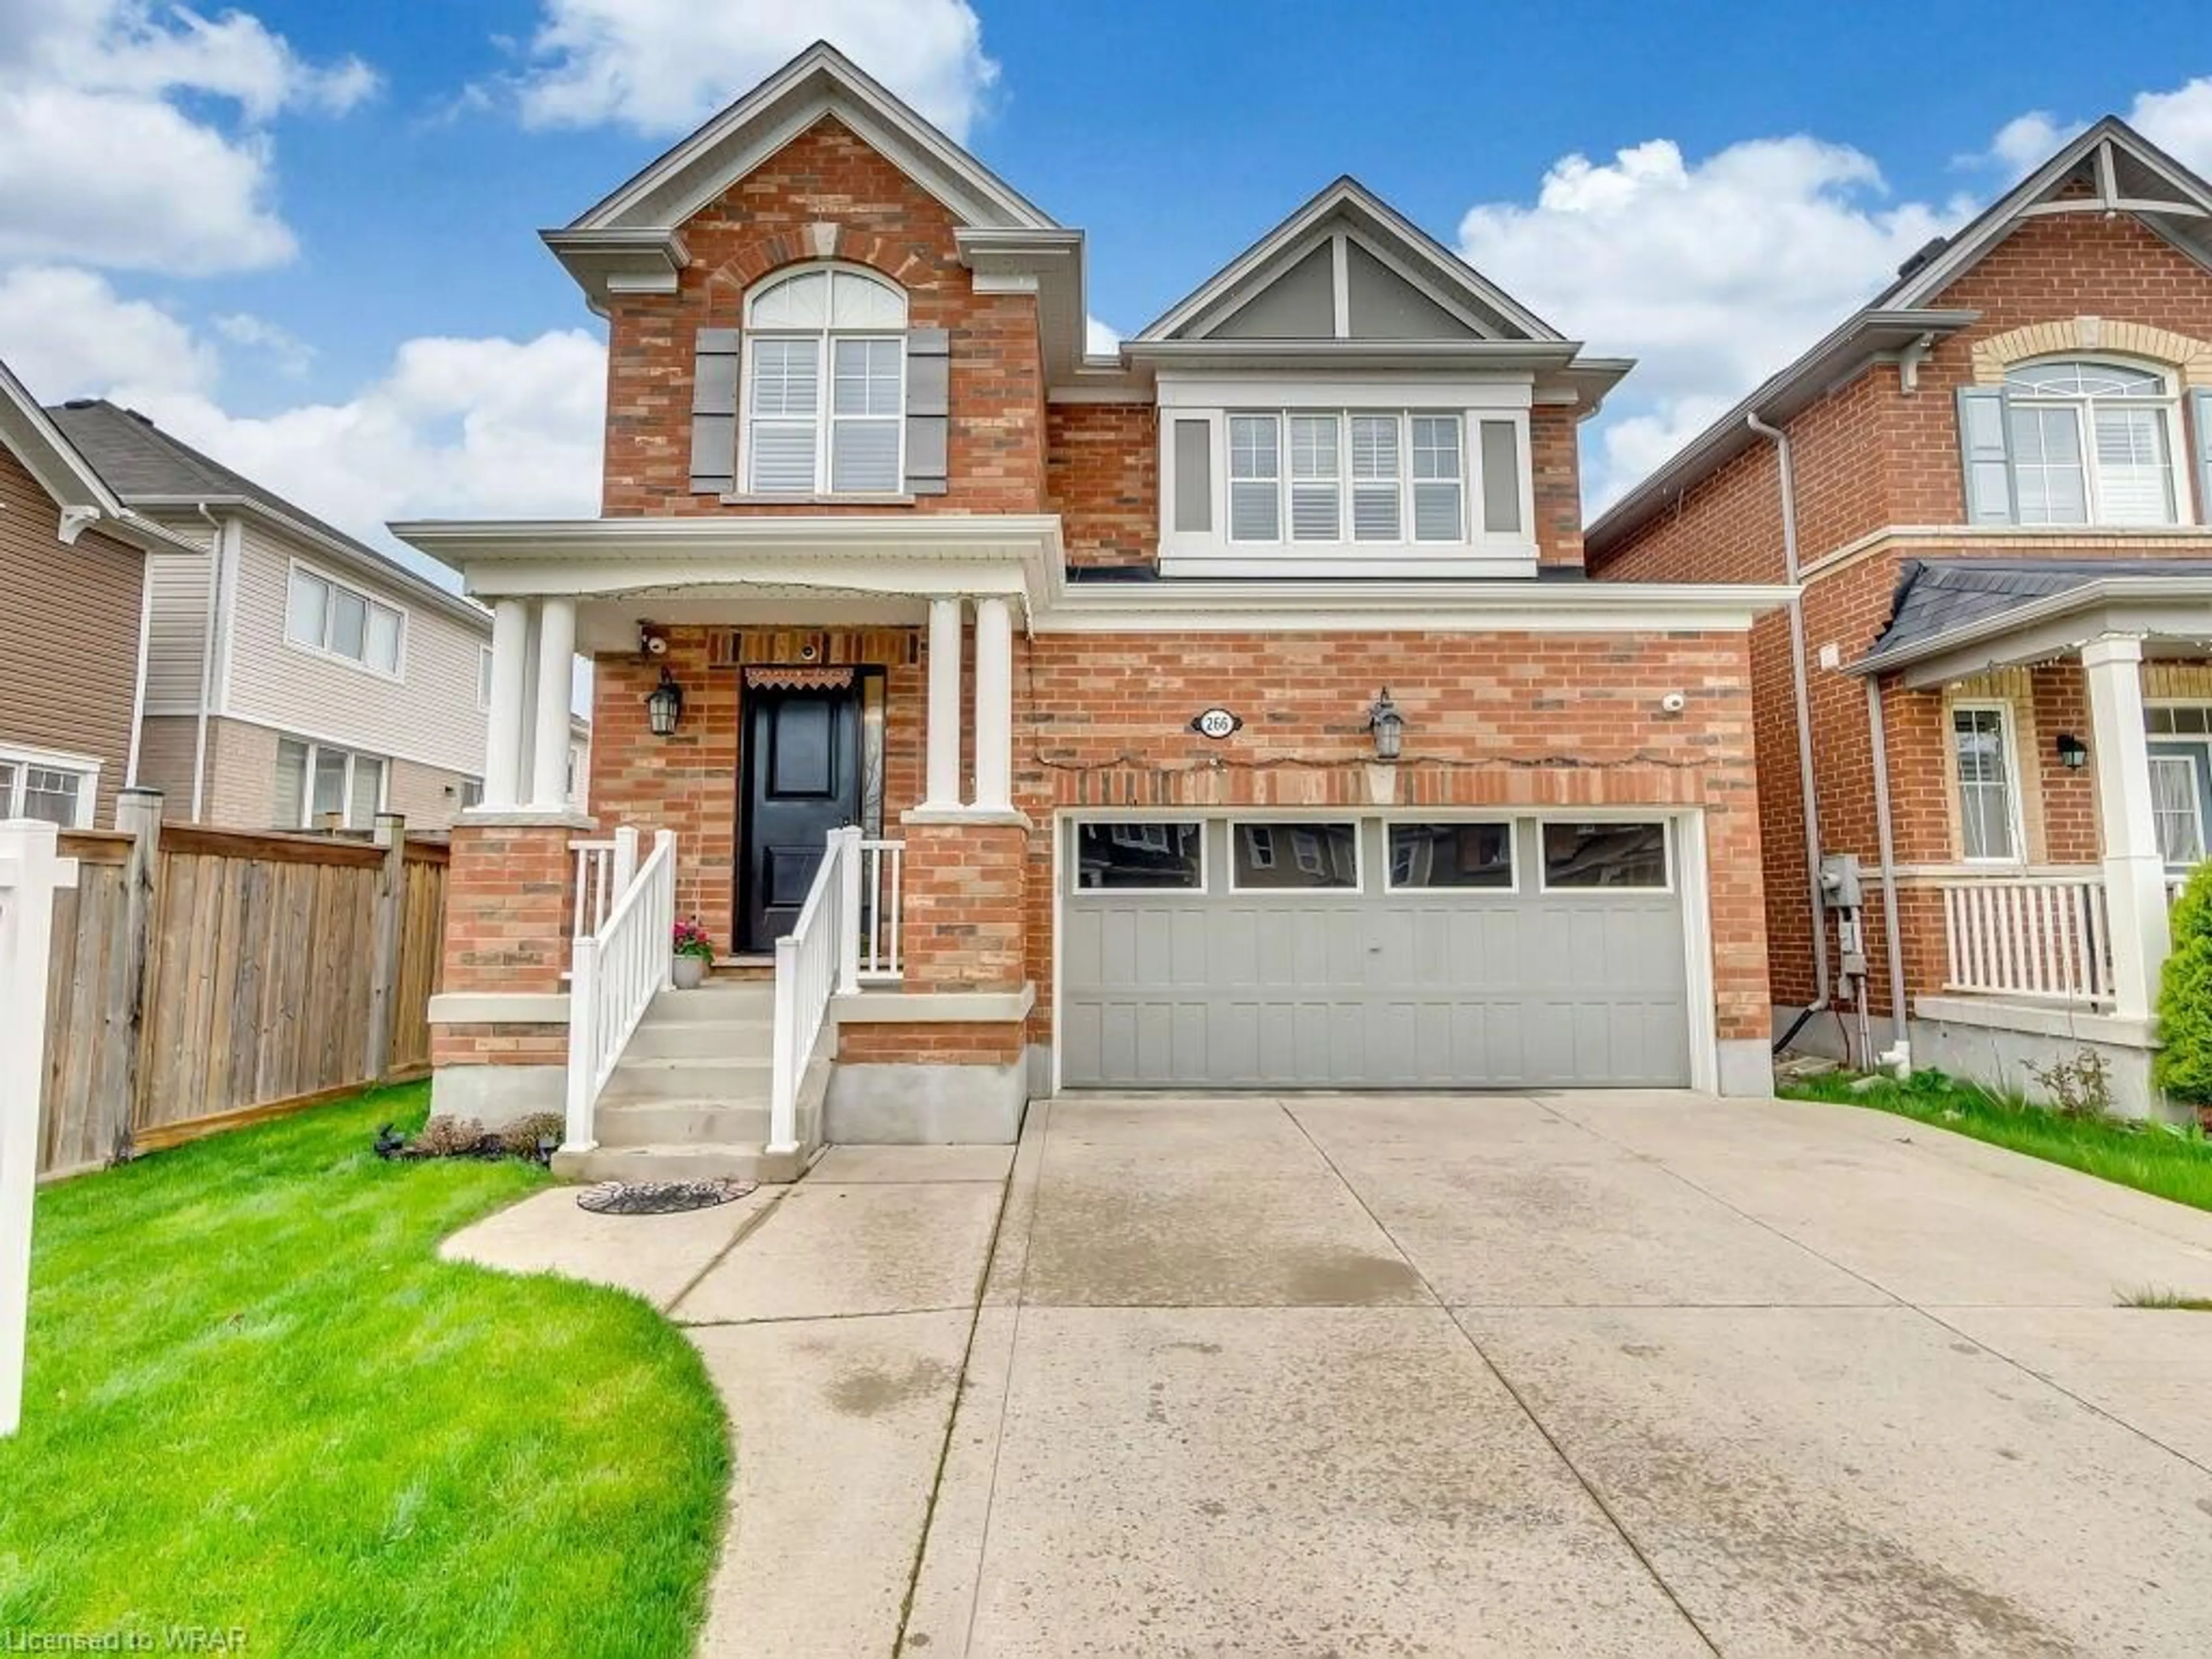 Home with brick exterior material for 266 Pineglen Cres, Kitchener Ontario N2R 0G3